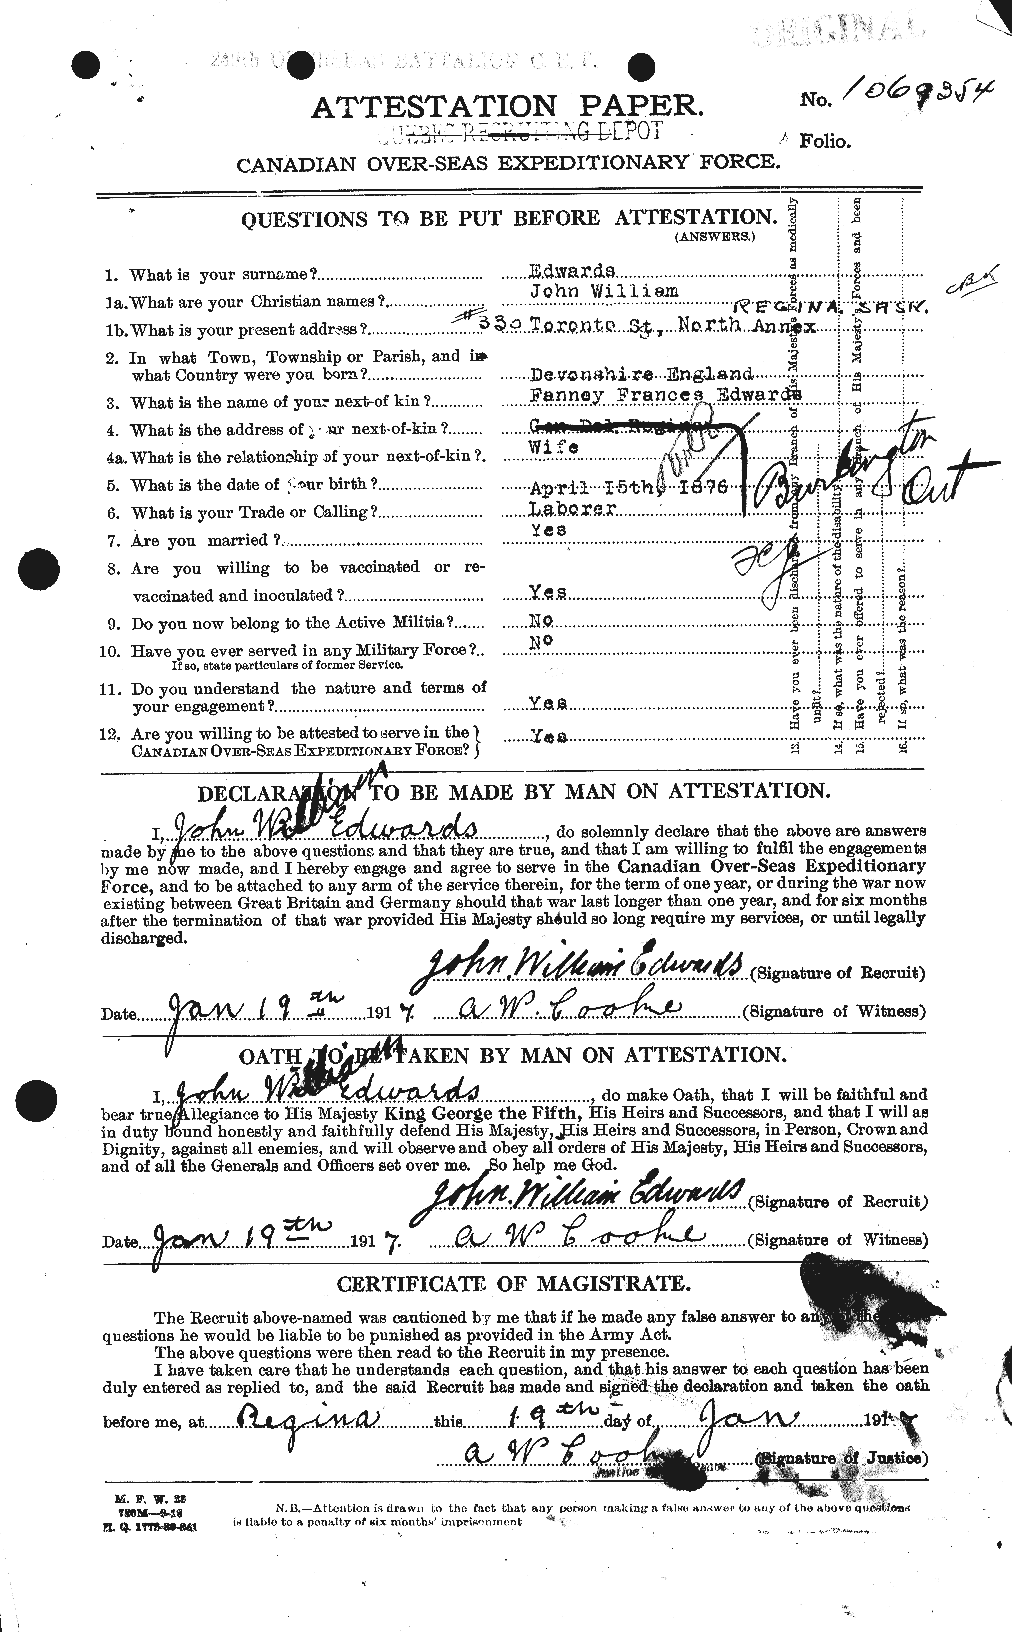 Personnel Records of the First World War - CEF 310164a